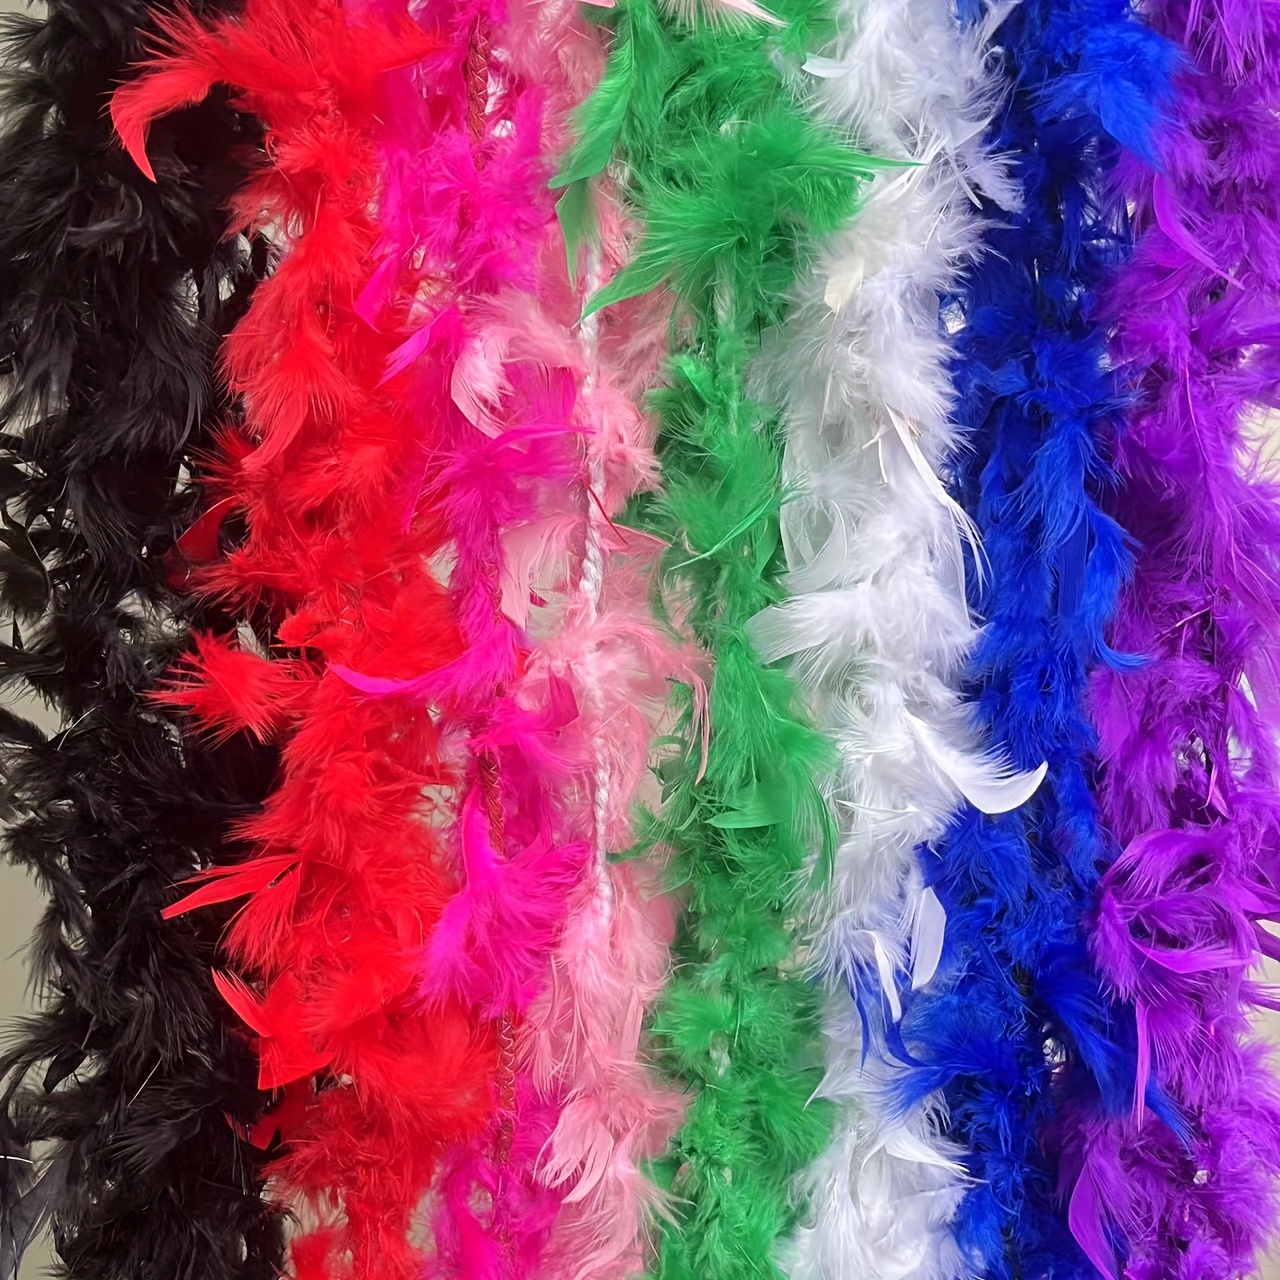 Buy 8 Pcs 6.6 Ft Colorful Feather Boas for Craft - Party Feather Boas Bulk,  Natural Plush Turkey Feathers Dress Up Boas for Halloween Unisex Christmas  Tree Wedding Party Performance DIY Decor (